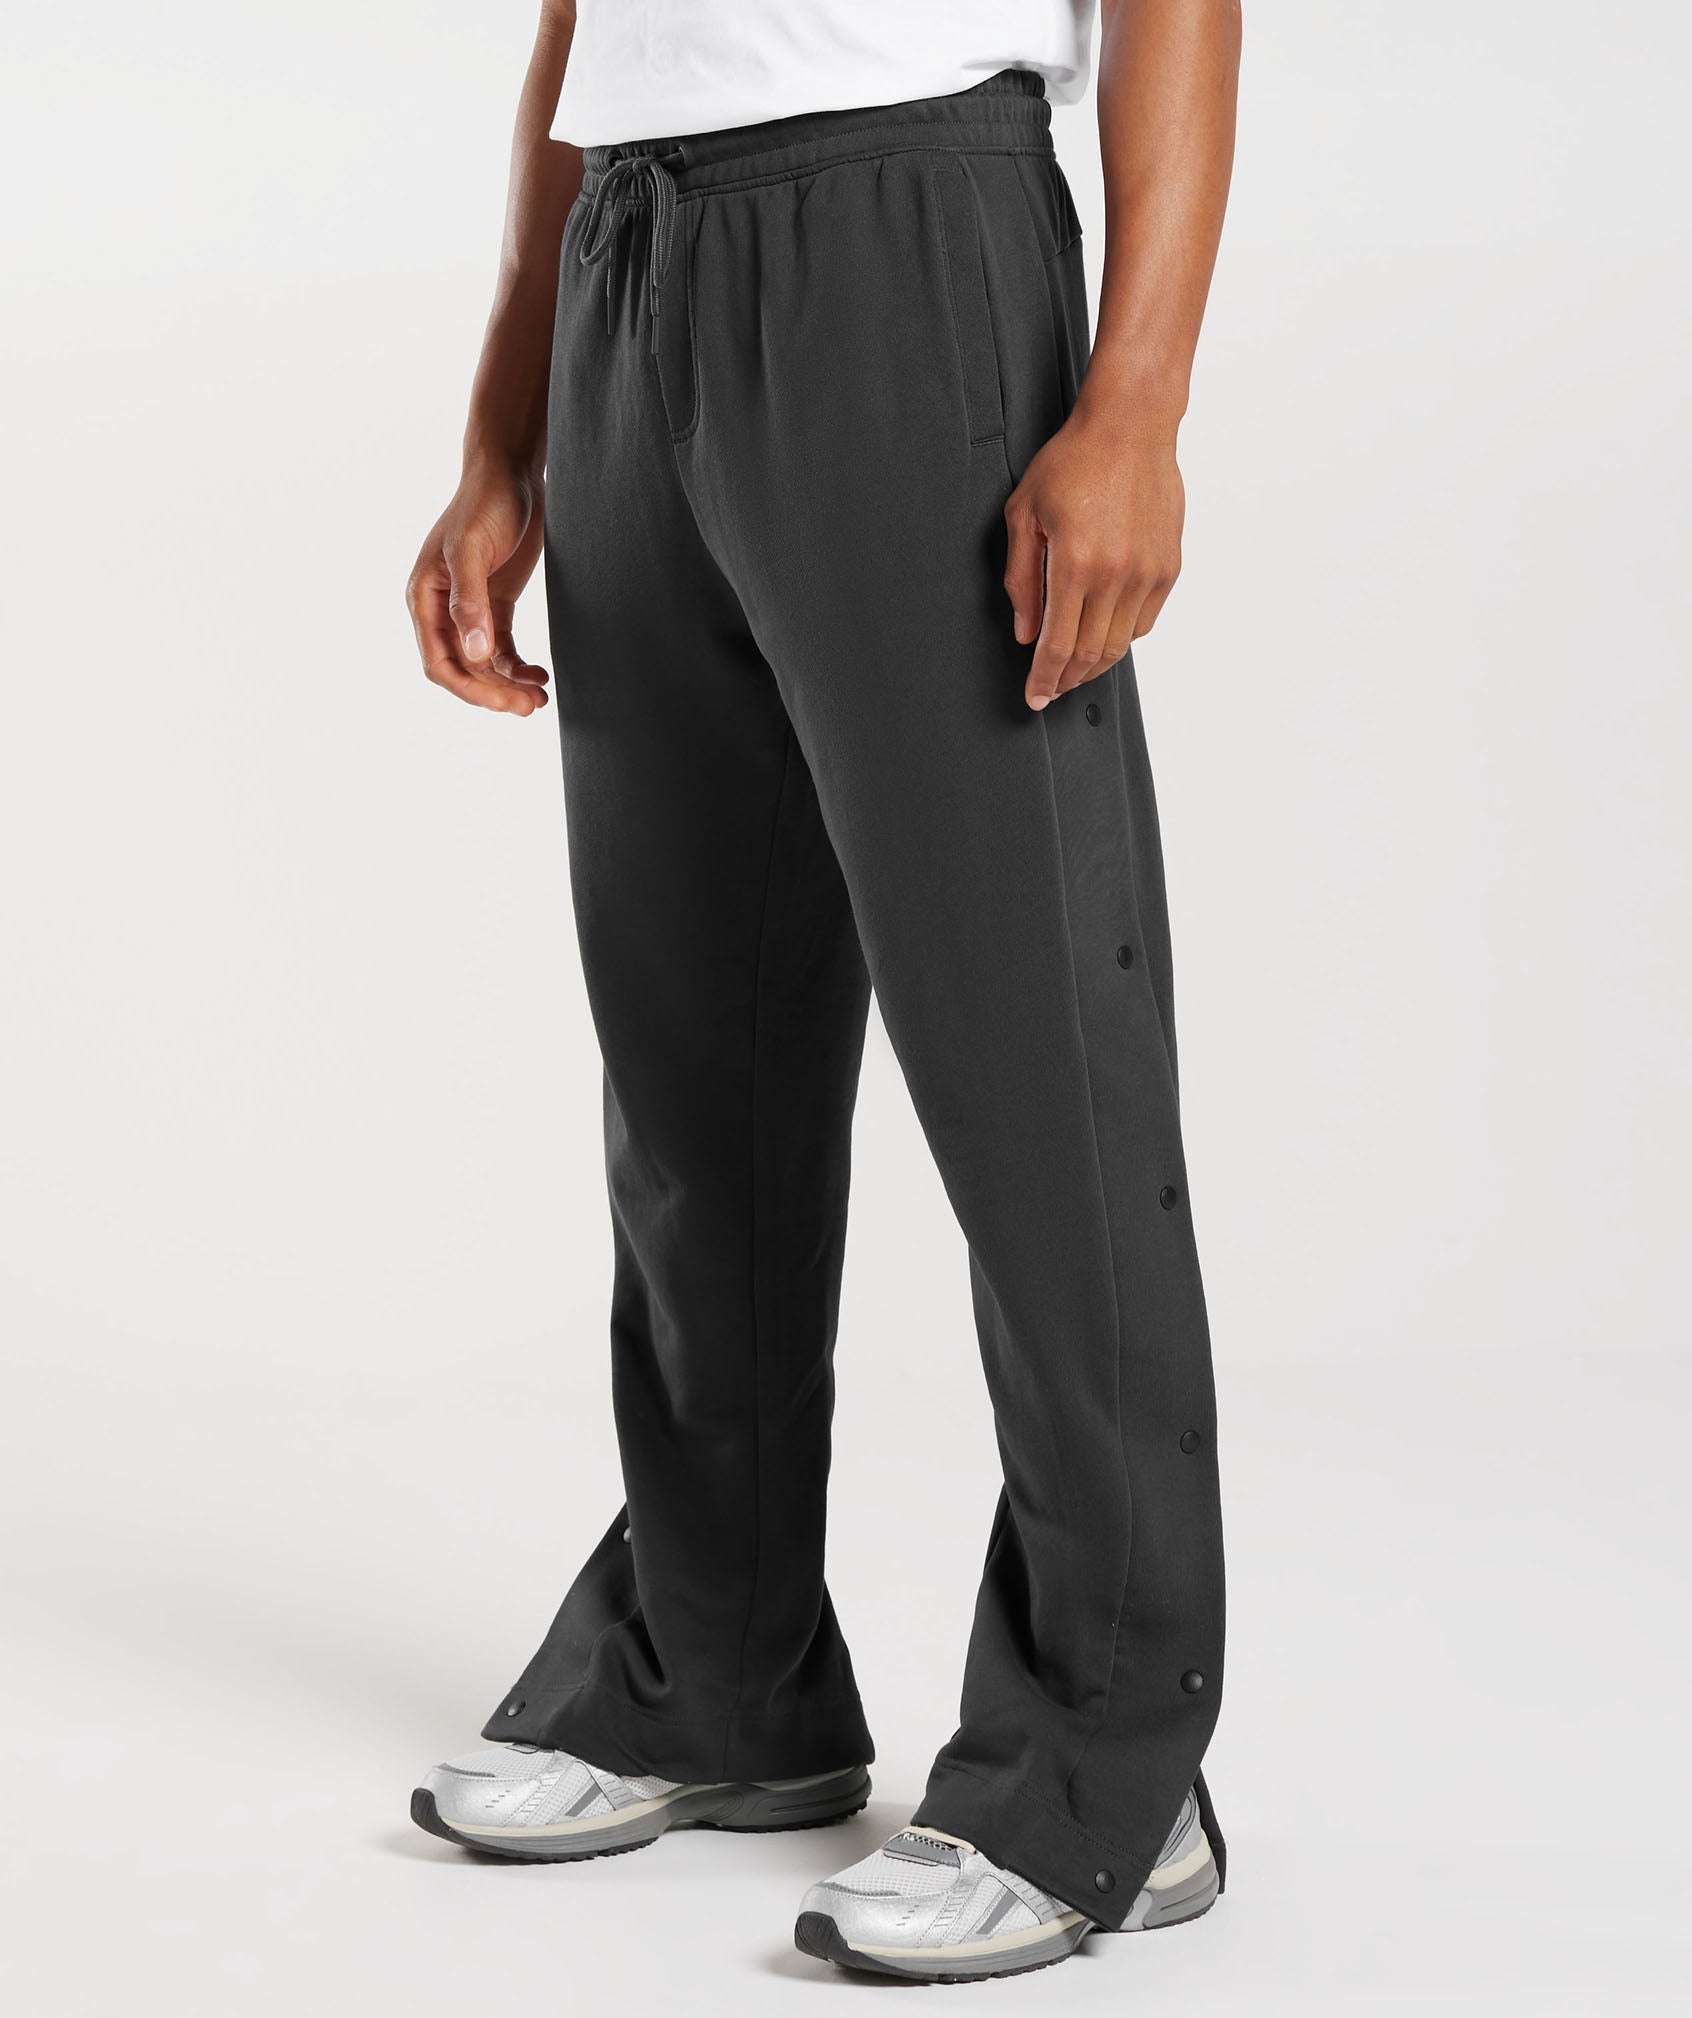 Rest Day Essentials Sweat Snap Joggers in Onyx Grey - view 3